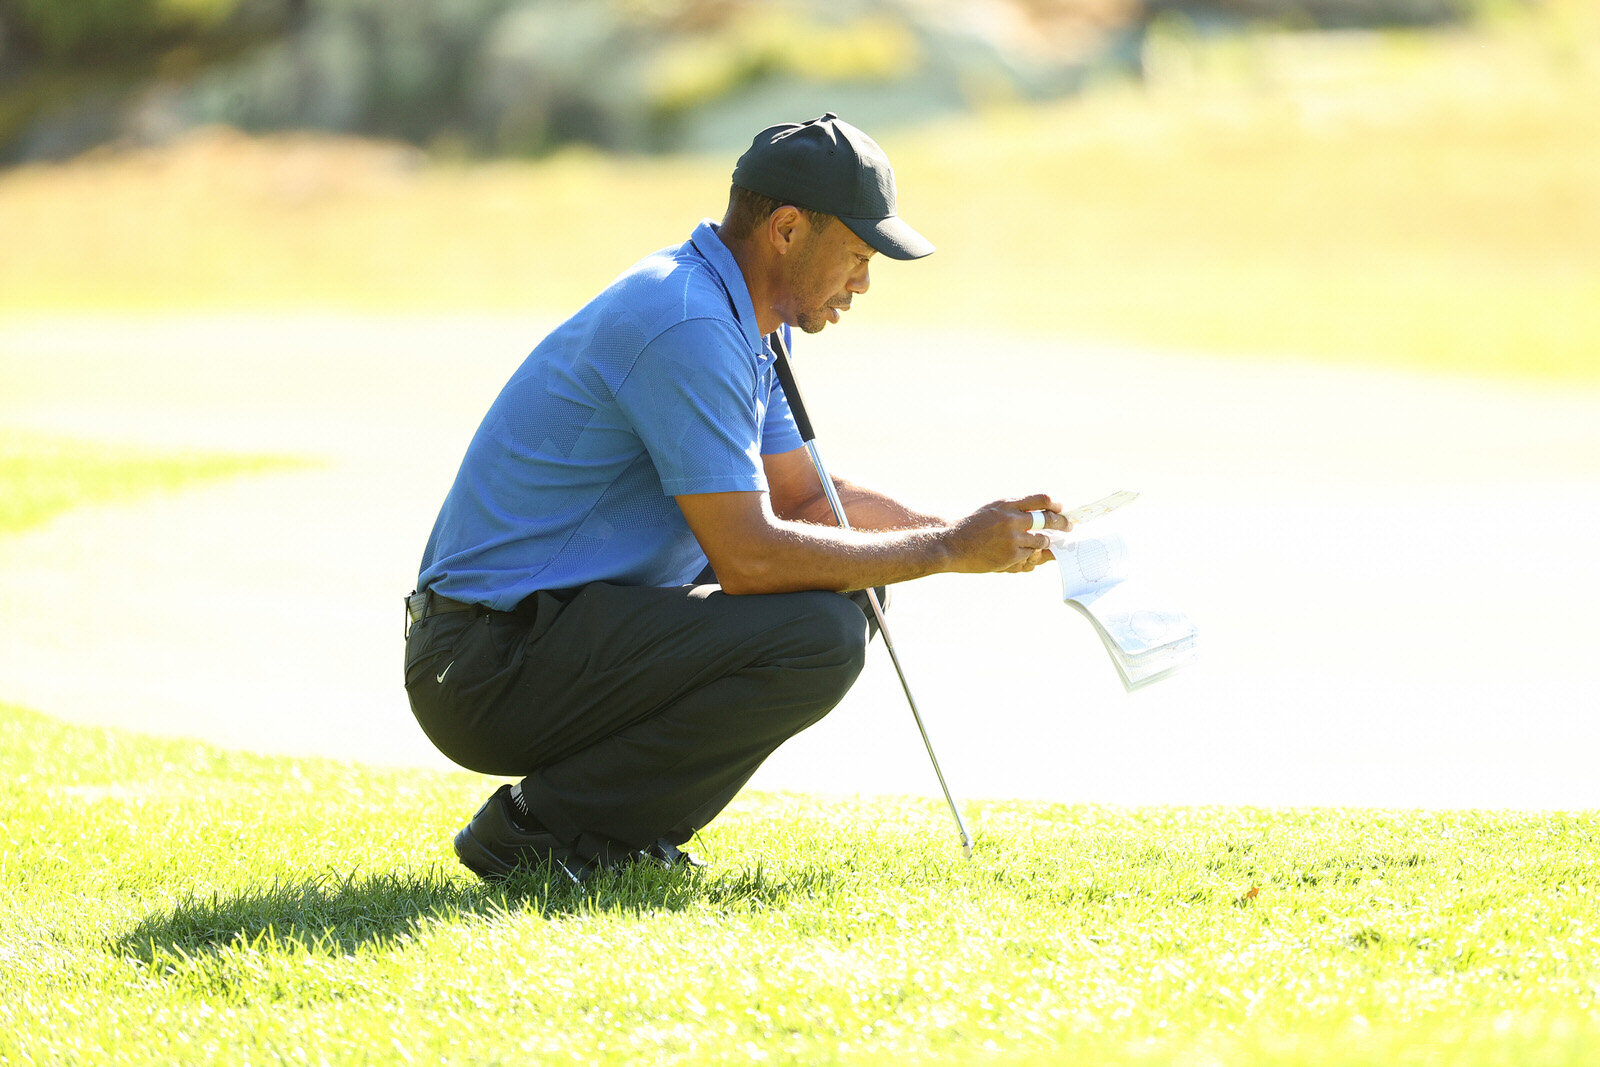  NORTON, MASSACHUSETTS - AUGUST 20: Tiger Woods of the United States lines up a putt on the 12th green during the first round of The Northern Trust at TPC Boston on August 20, 2020 in Norton, Massachusetts. (Photo by Maddie Meyer/Getty Images) 